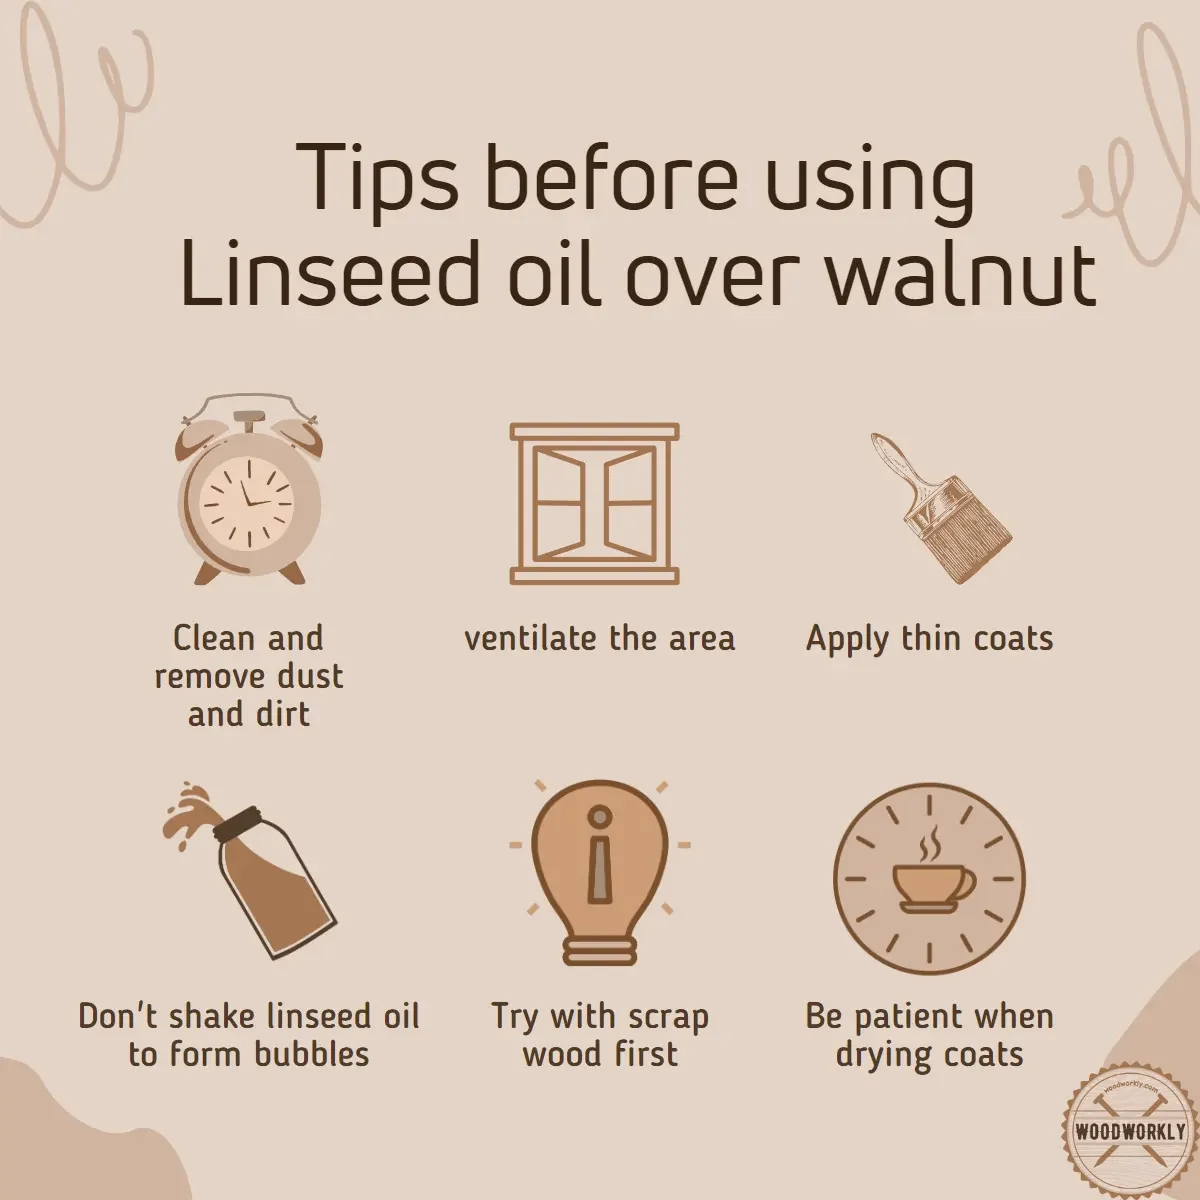 Tips before using Linseed oil over walnut